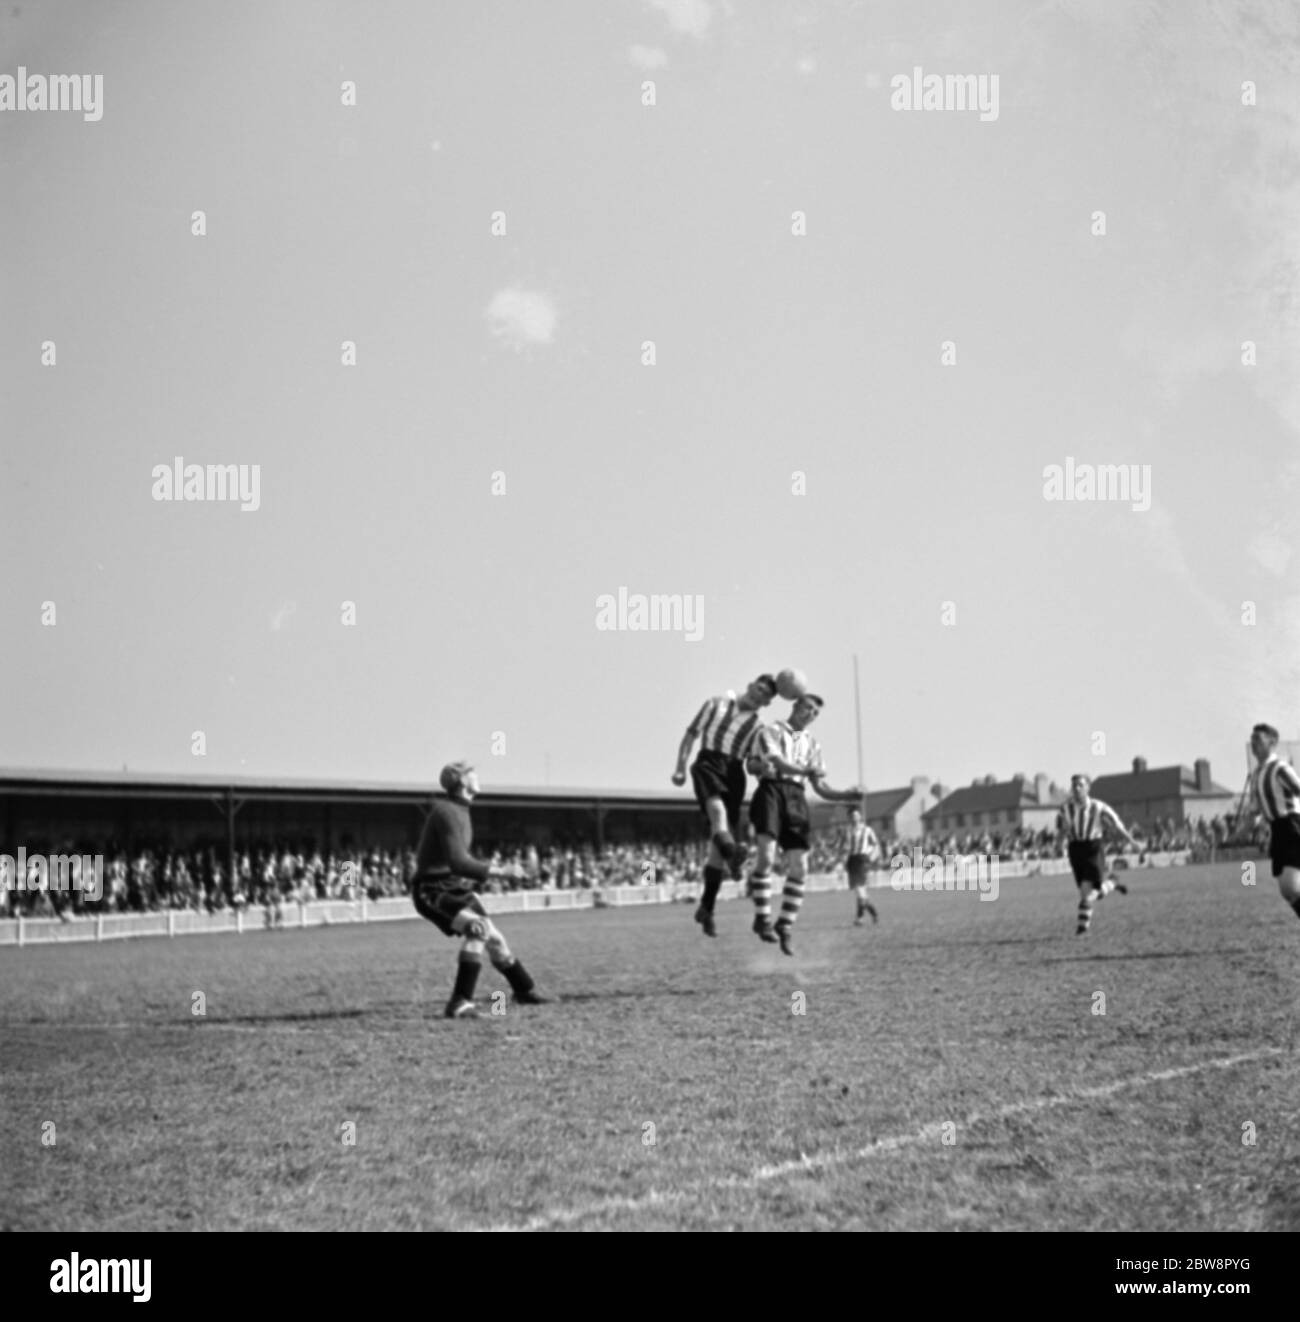 Dartford vs. Newport County reserves - Southern League - 29/08/36 Newport County Association Football Club versus Dartford football club . Two players compete fo the ball while the goalie watches on . 1936 Stock Photo